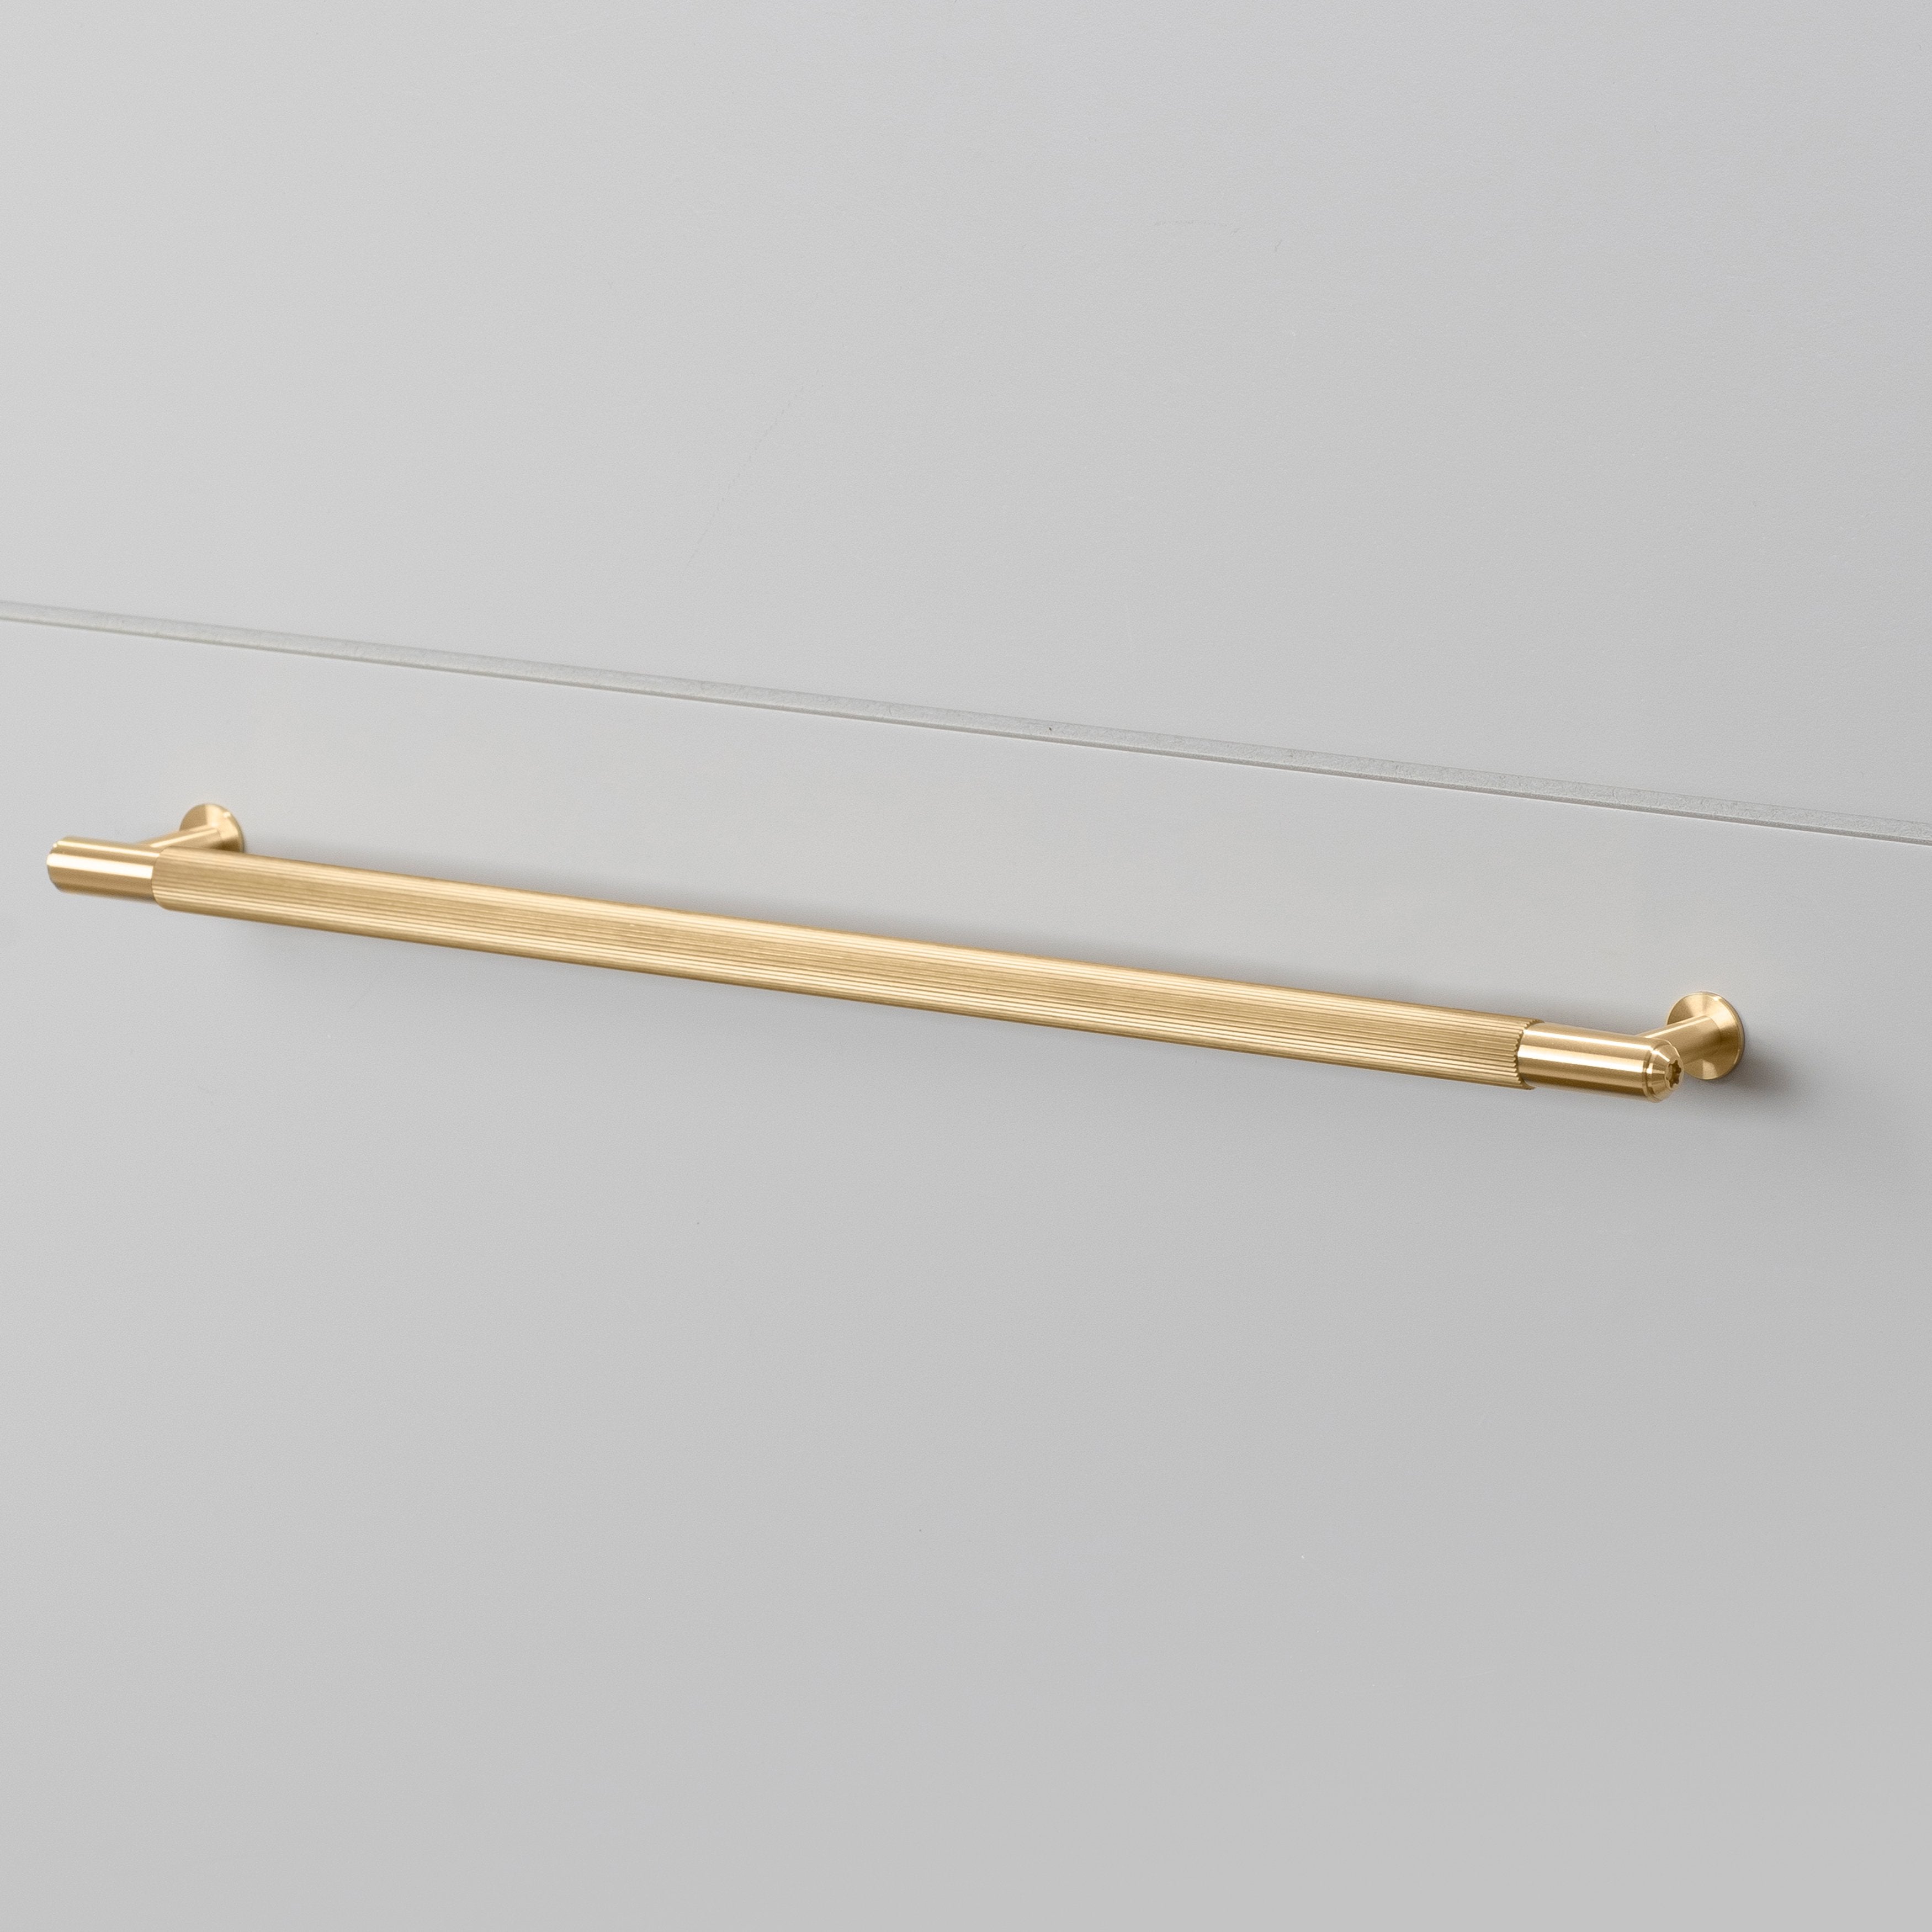 PULL BAR / LINEAR / BRASS - LARGE